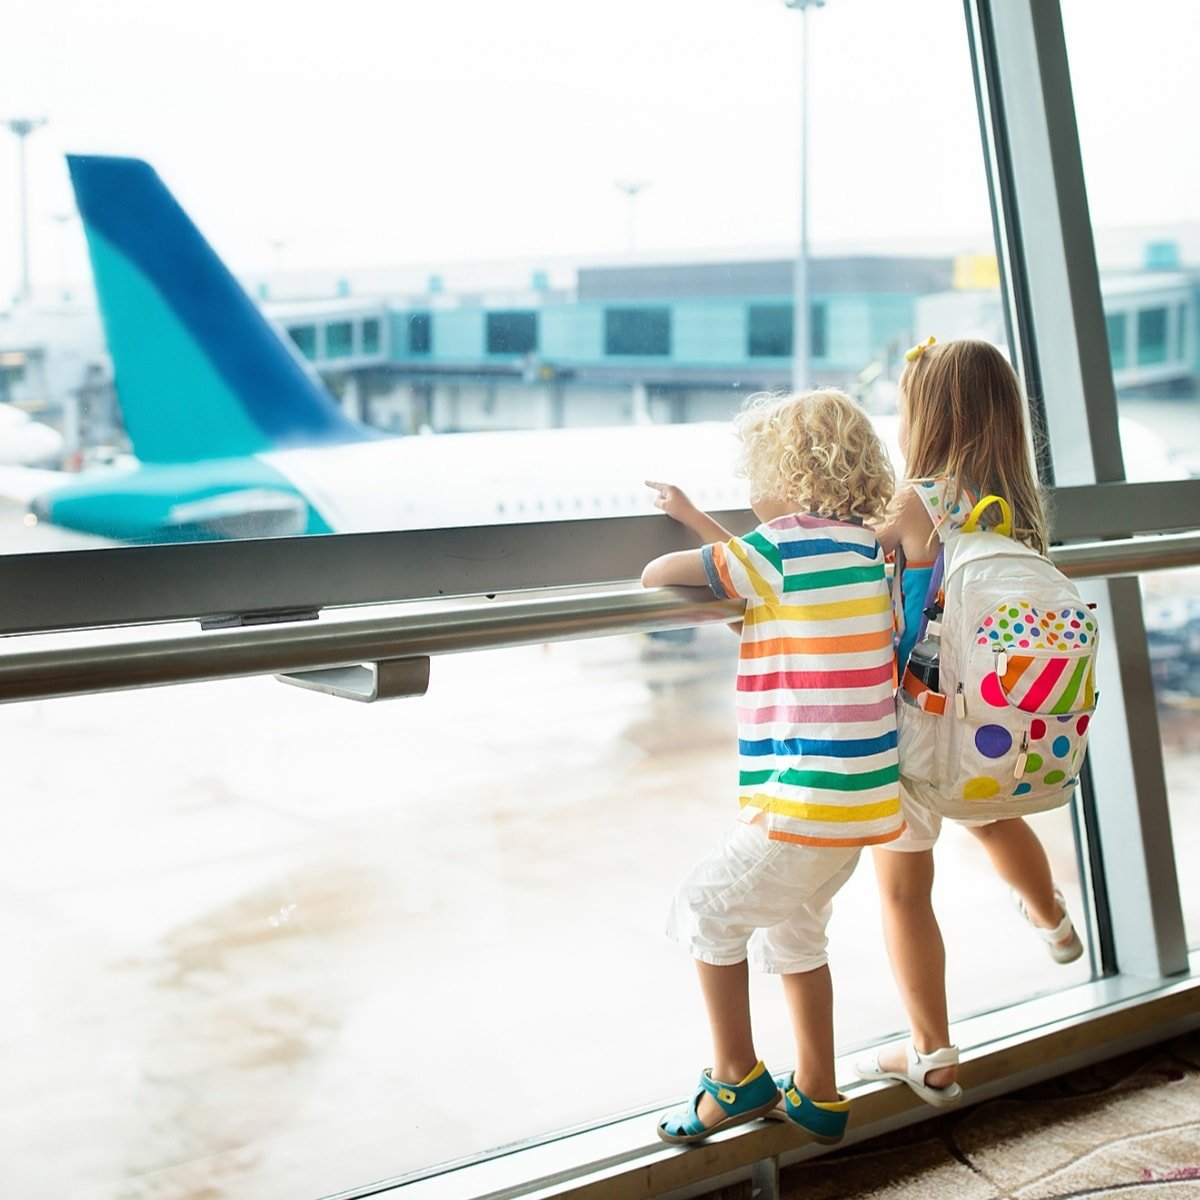 9 Quick Tips for Airport Security with Kids